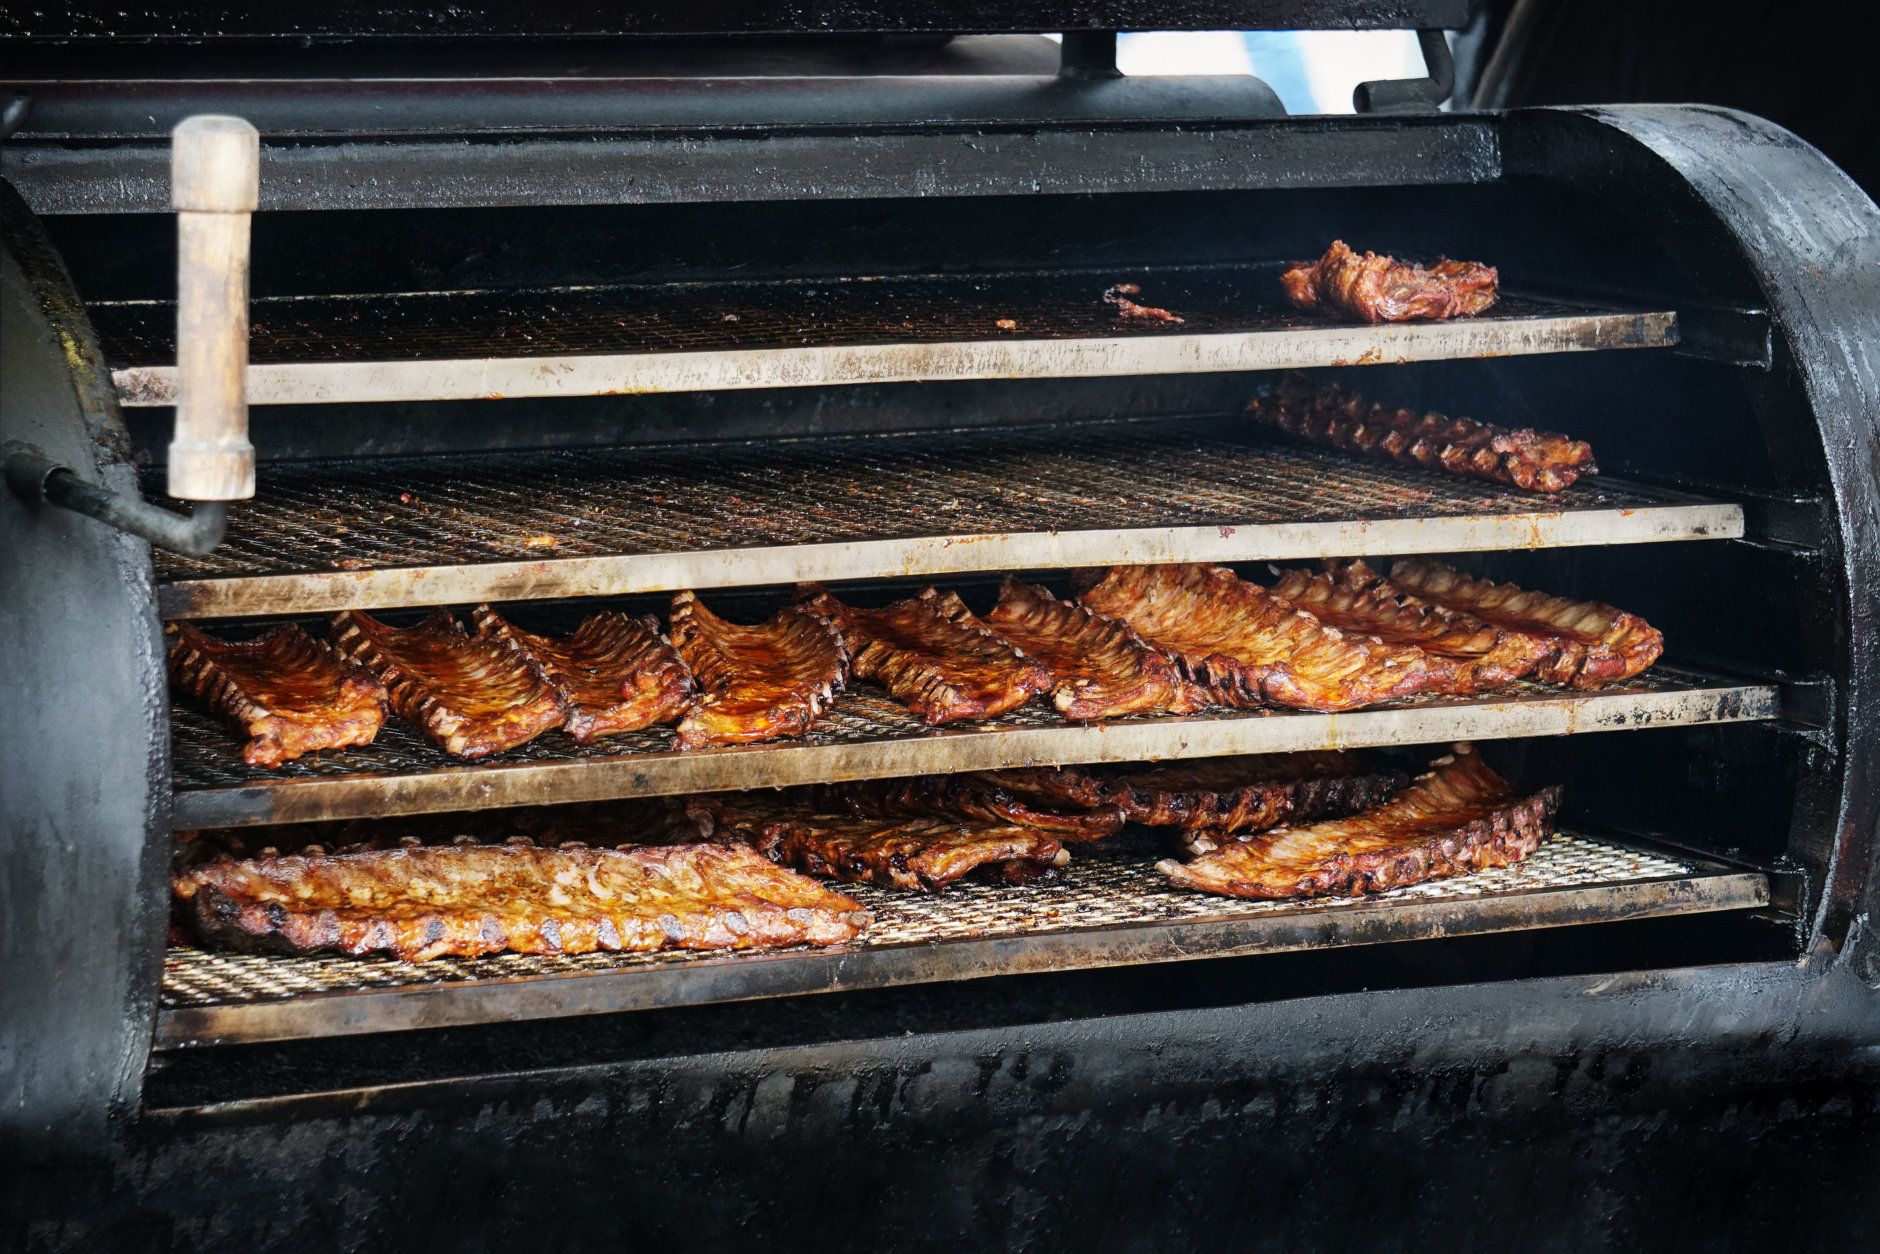 Barbecue spareribs in barbecue smoker, grilled pork meat ribs (Courtesy/Getty Images)